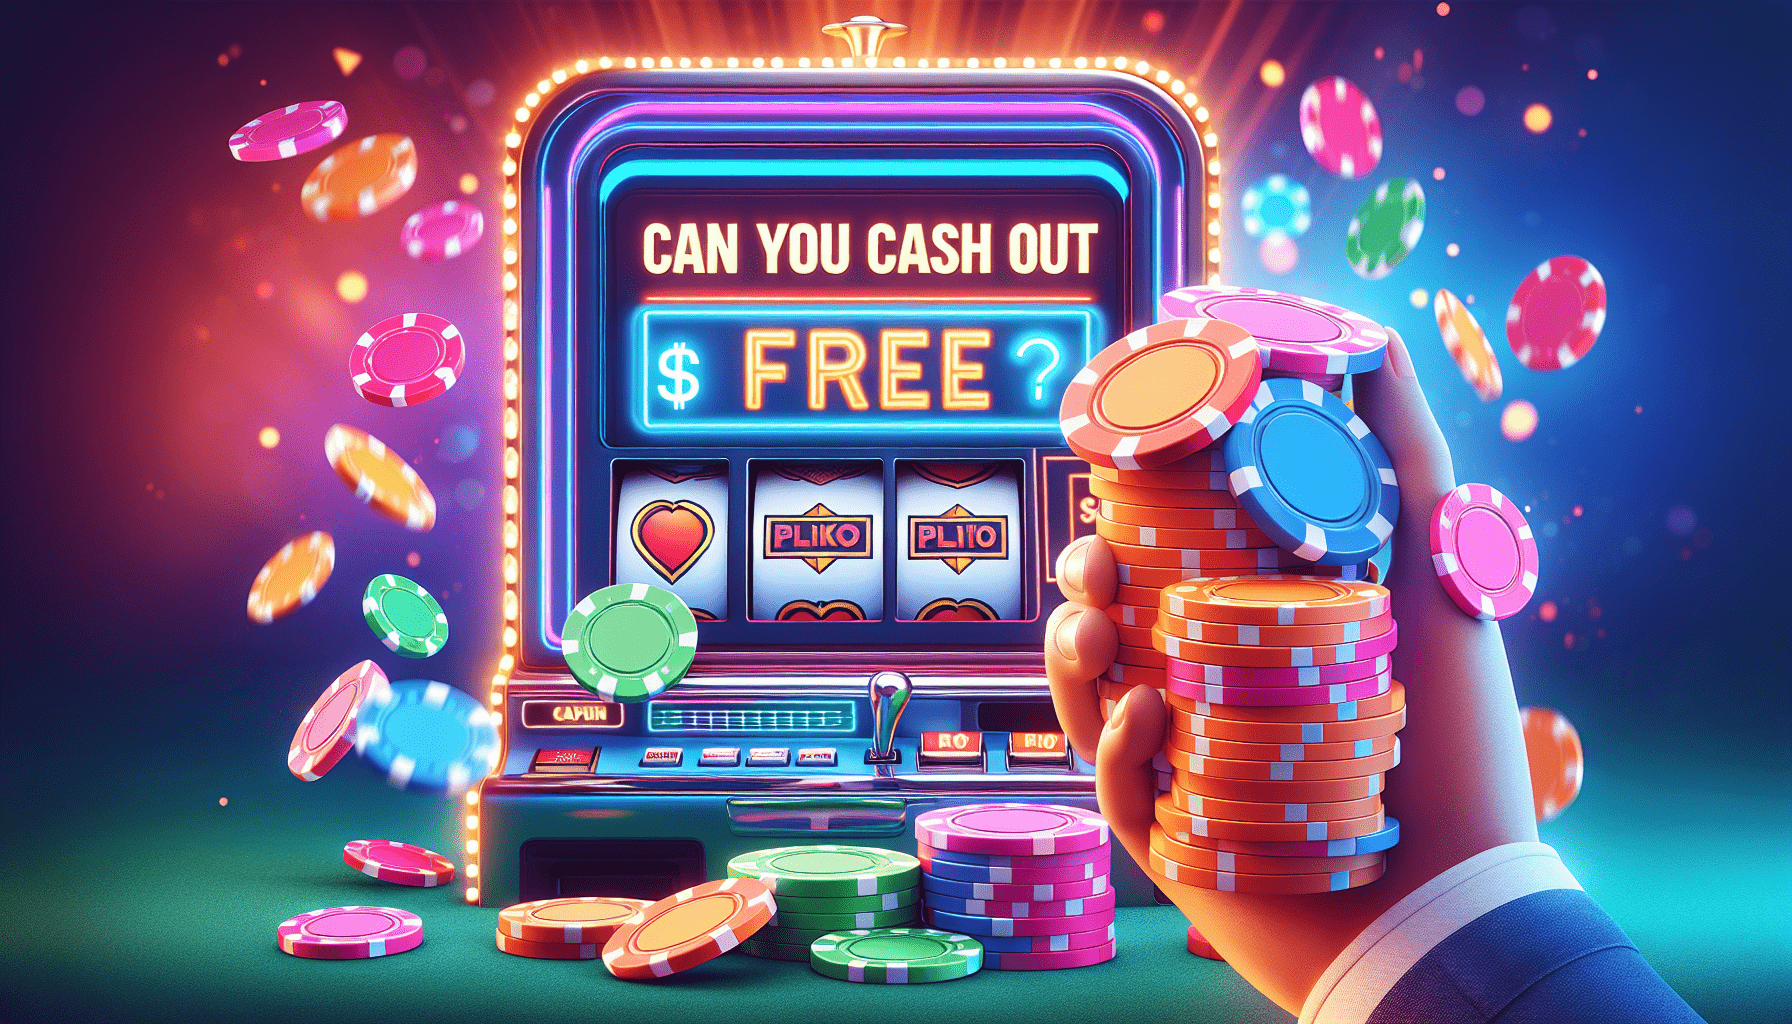 Can You Cash Out Free Slot Play?